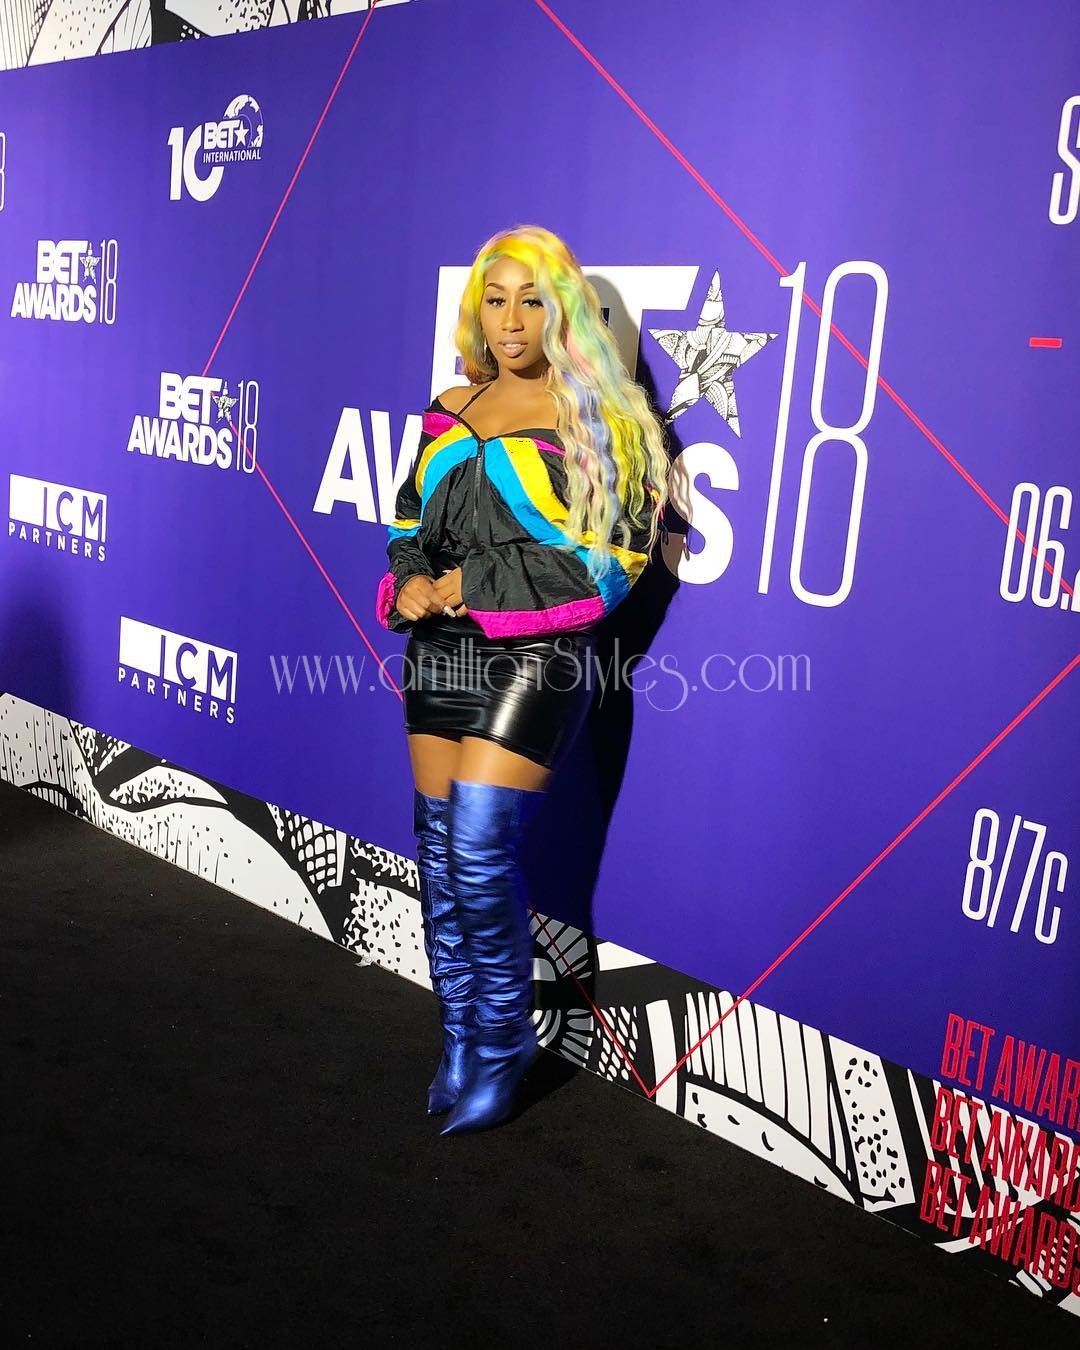 Style Highlights From The 2018 BET Awards Plush What Our Favorite Nigerian Celebs Wore